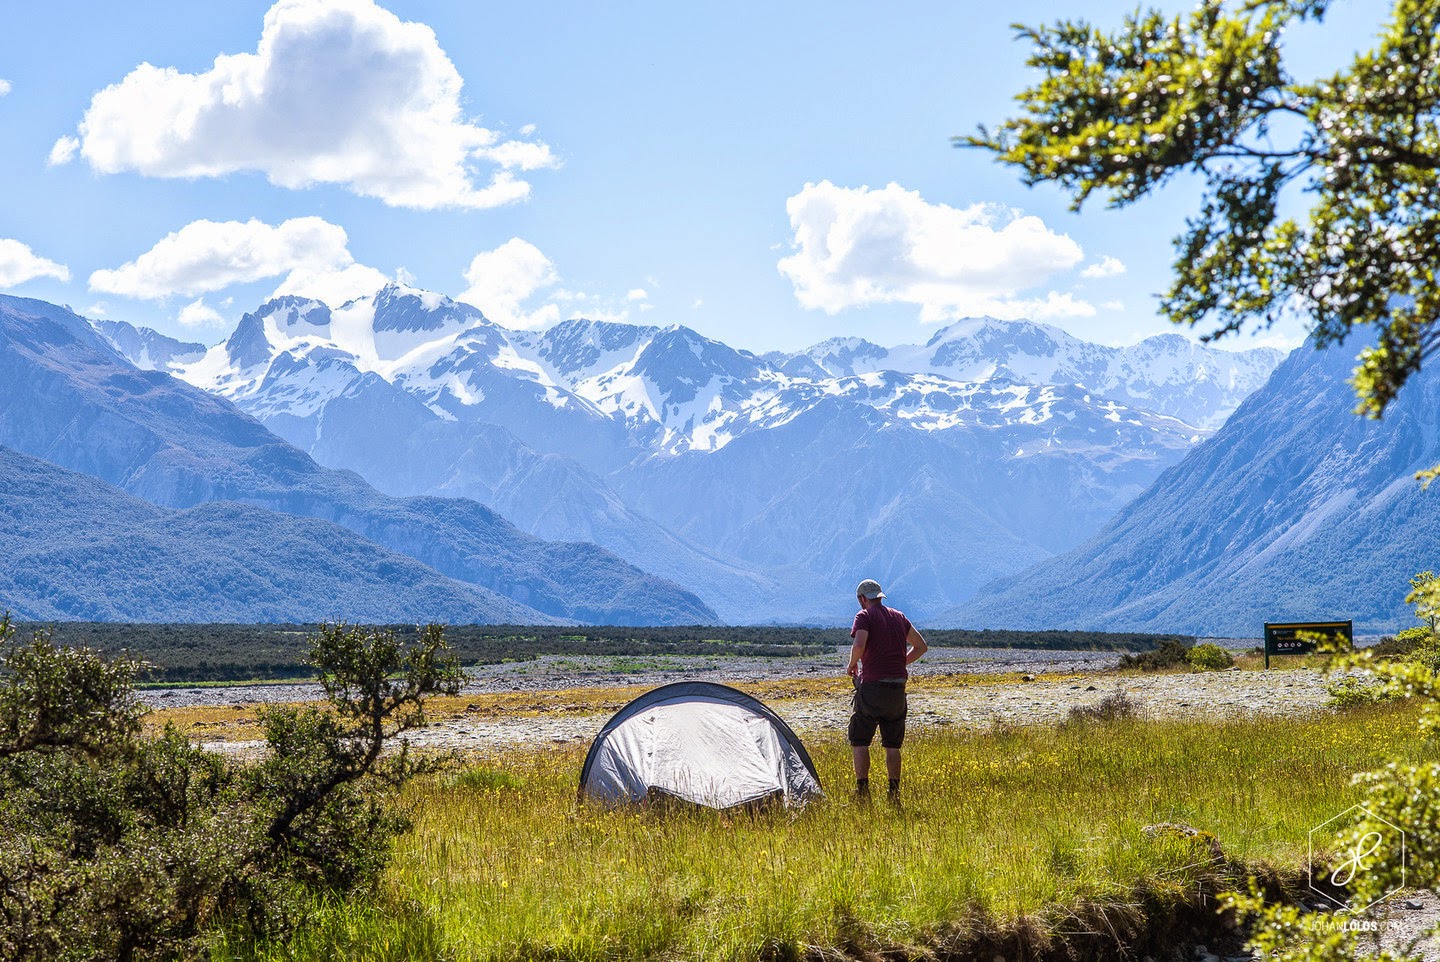 Arthur's Pass - He Traveled Around New Zealand In A Camper Van… This Is What He Saw.